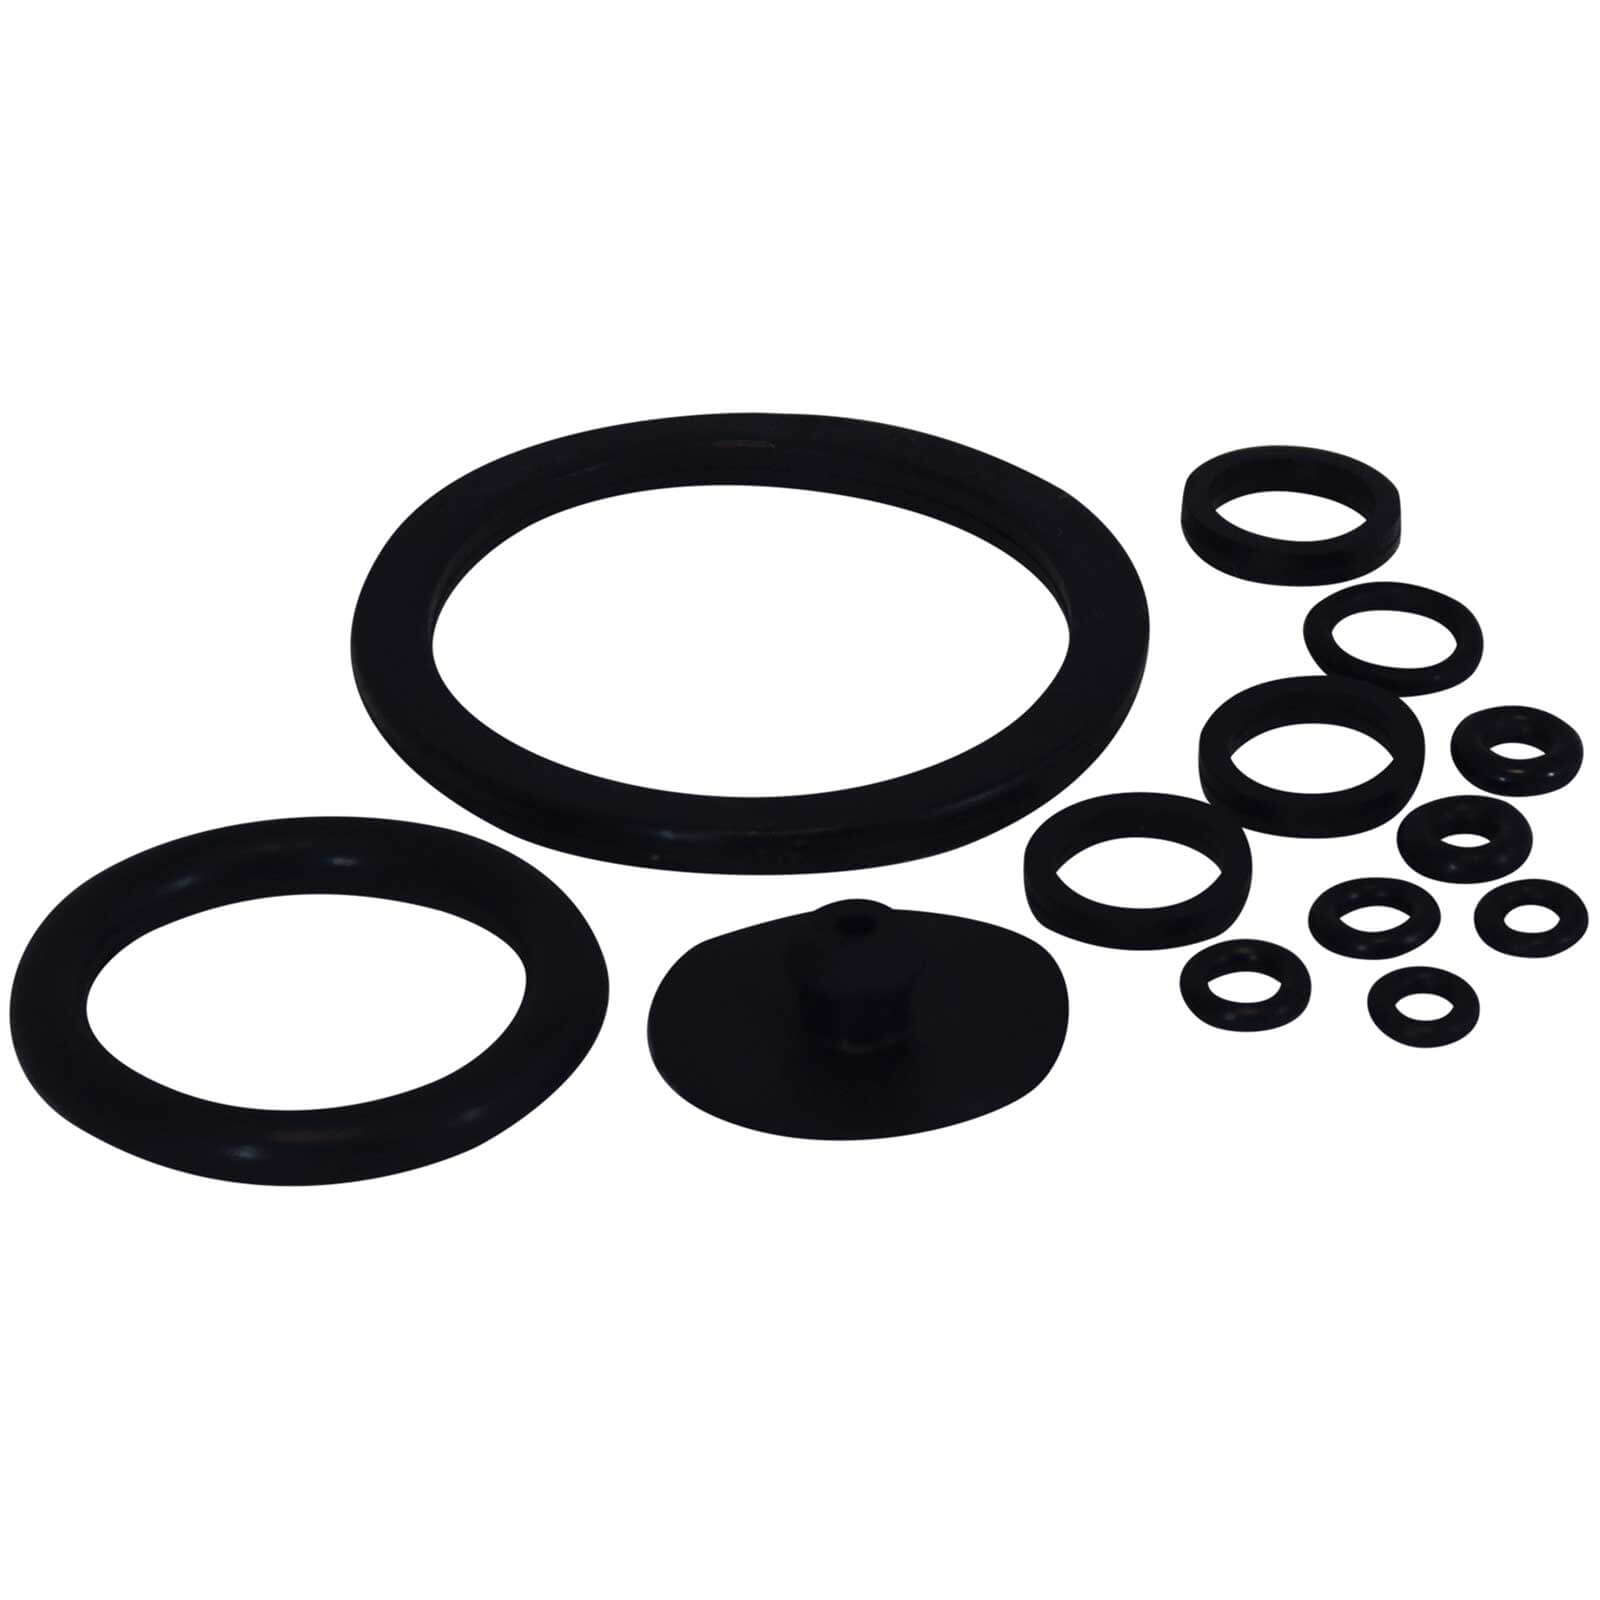 Photo of Spear And Jackson Replacement O Rings For 5l Chemical Pressure Sprayers